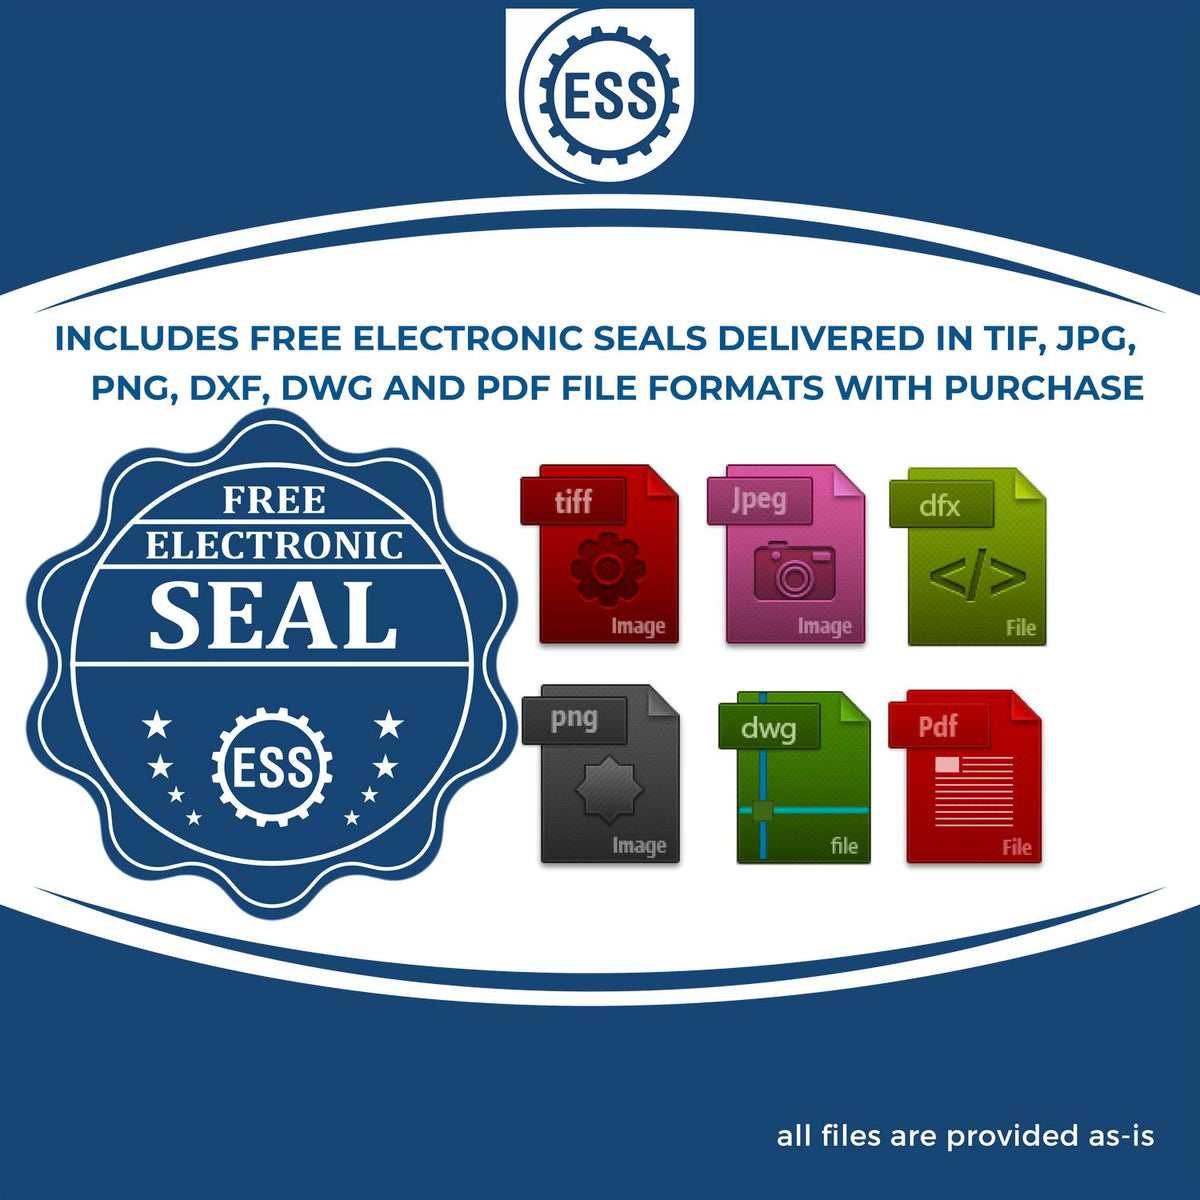 An infographic for the free electronic seal for the Virginia Professional Engineer Seal Stamp illustrating the different file type icons such as DXF, DWG, TIF, JPG and PNG.